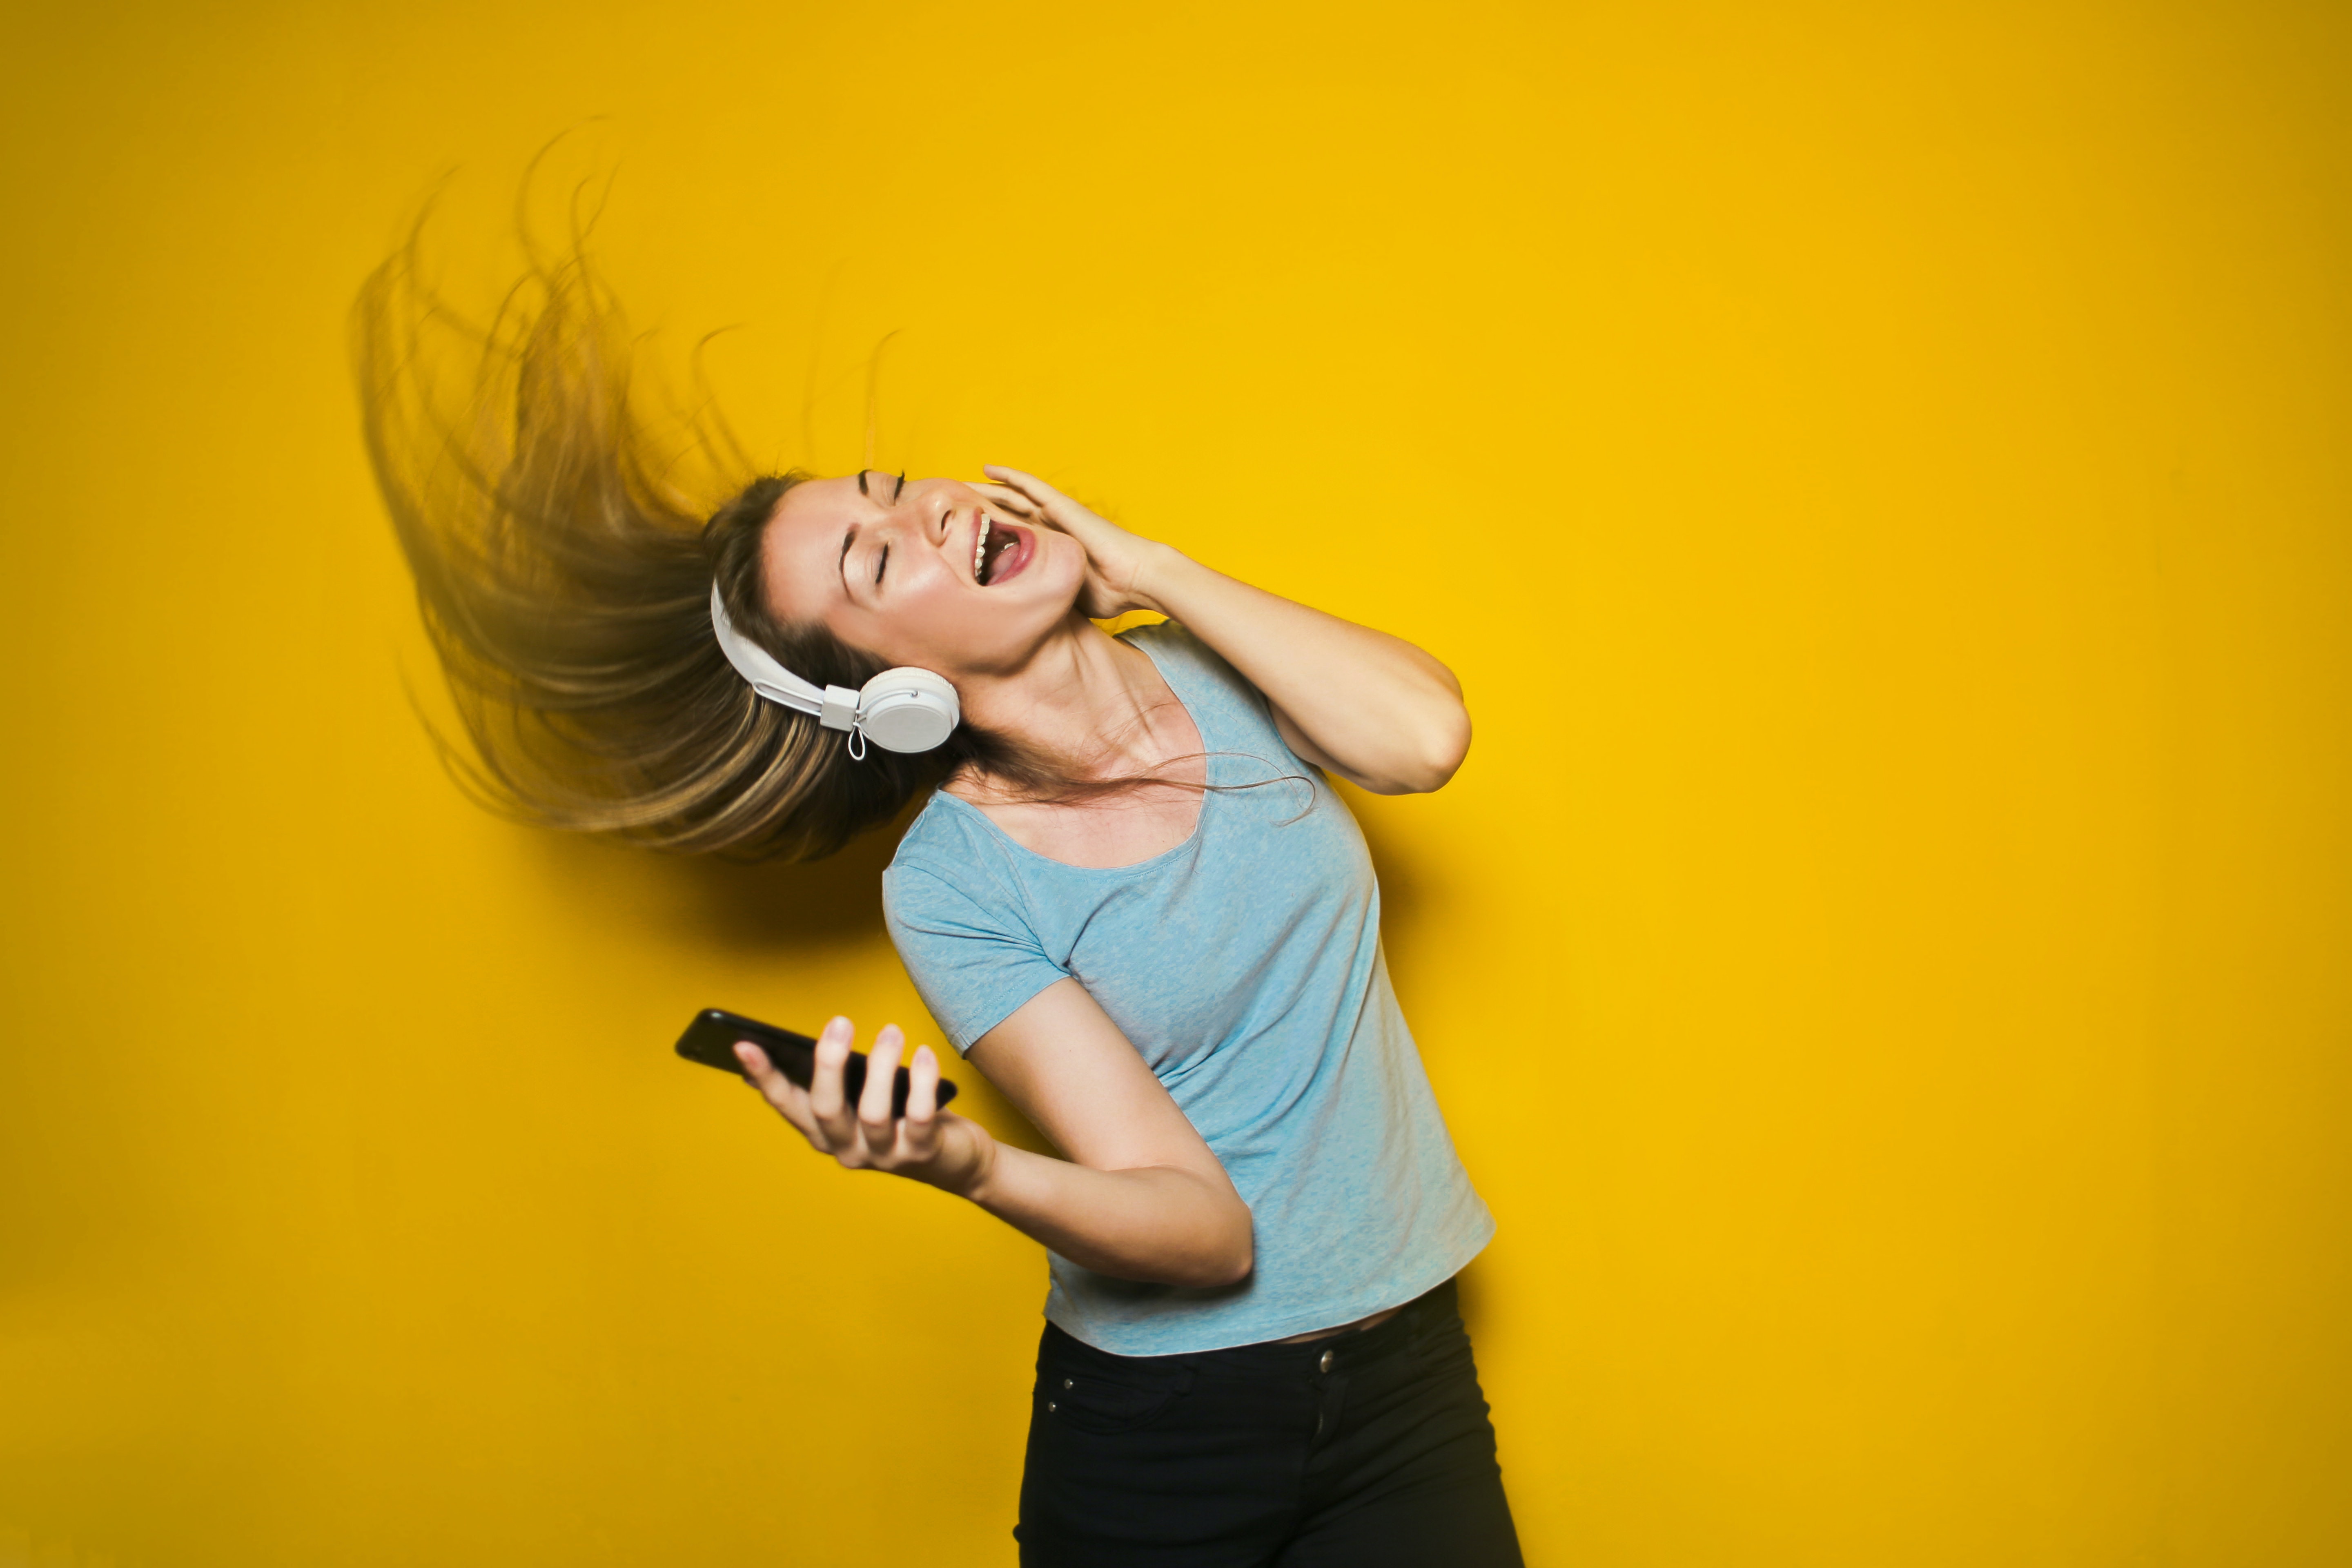 Woman in front of a yellow background whipping her hair while listening to music